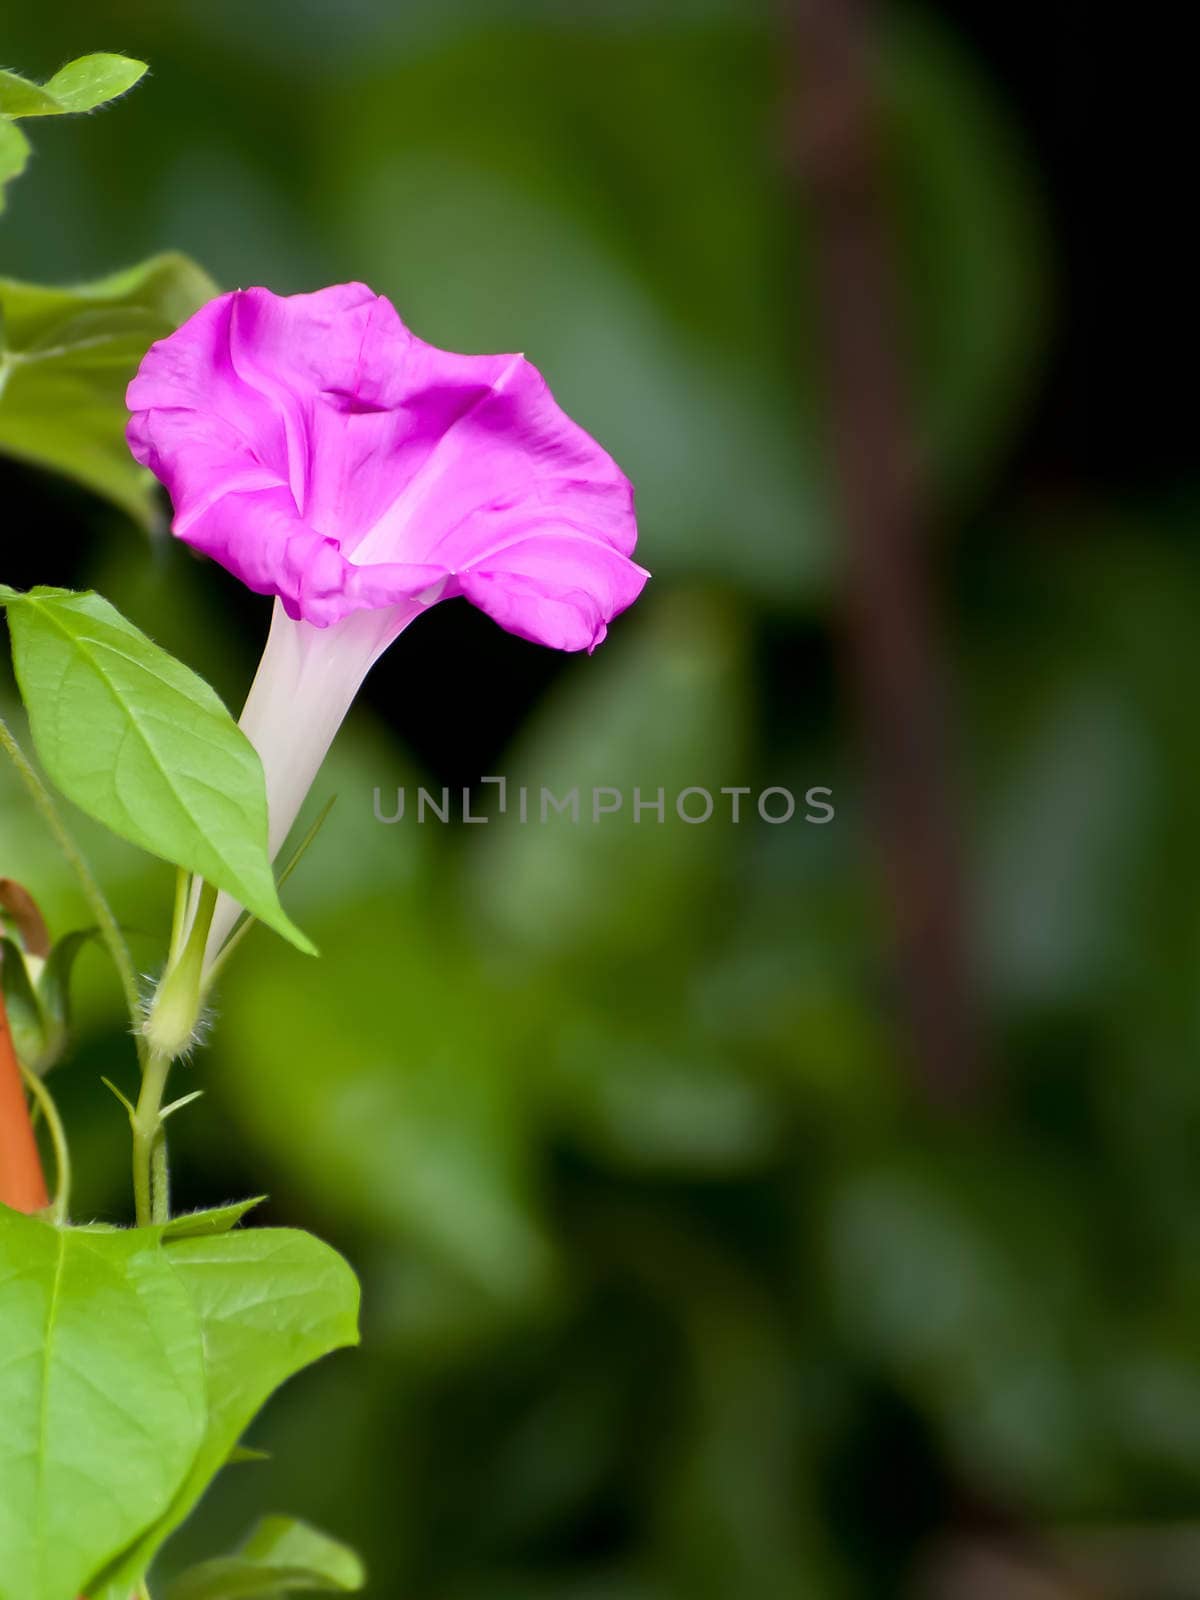 Beautiful pink flower of Morning glory(Ipomoea sp. Family Convolvulaceae), shallow depth of field with blur background,